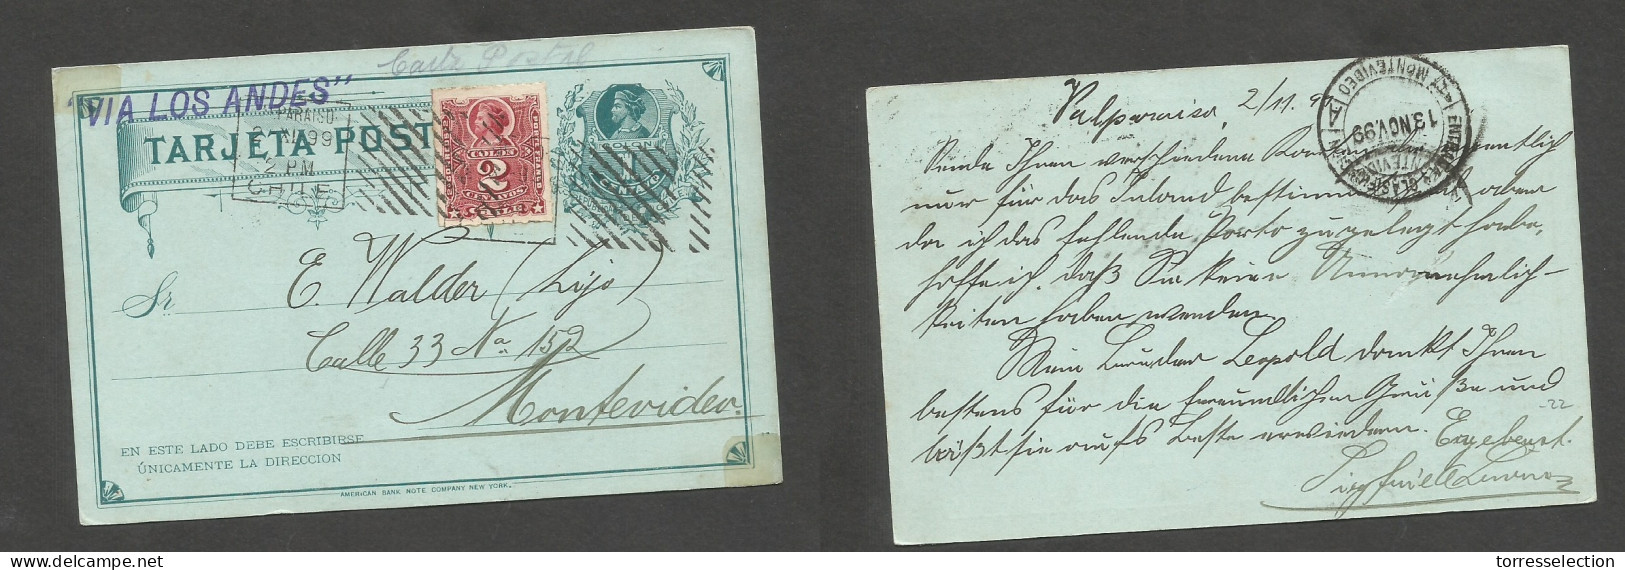 CHILE - Stationery. 1899 (2 Nov) Valp - Montevideo, Uruguay Via Los Andes, 1c Green Stat Card + 2c Red Perce Adtl, Tied  - Chile